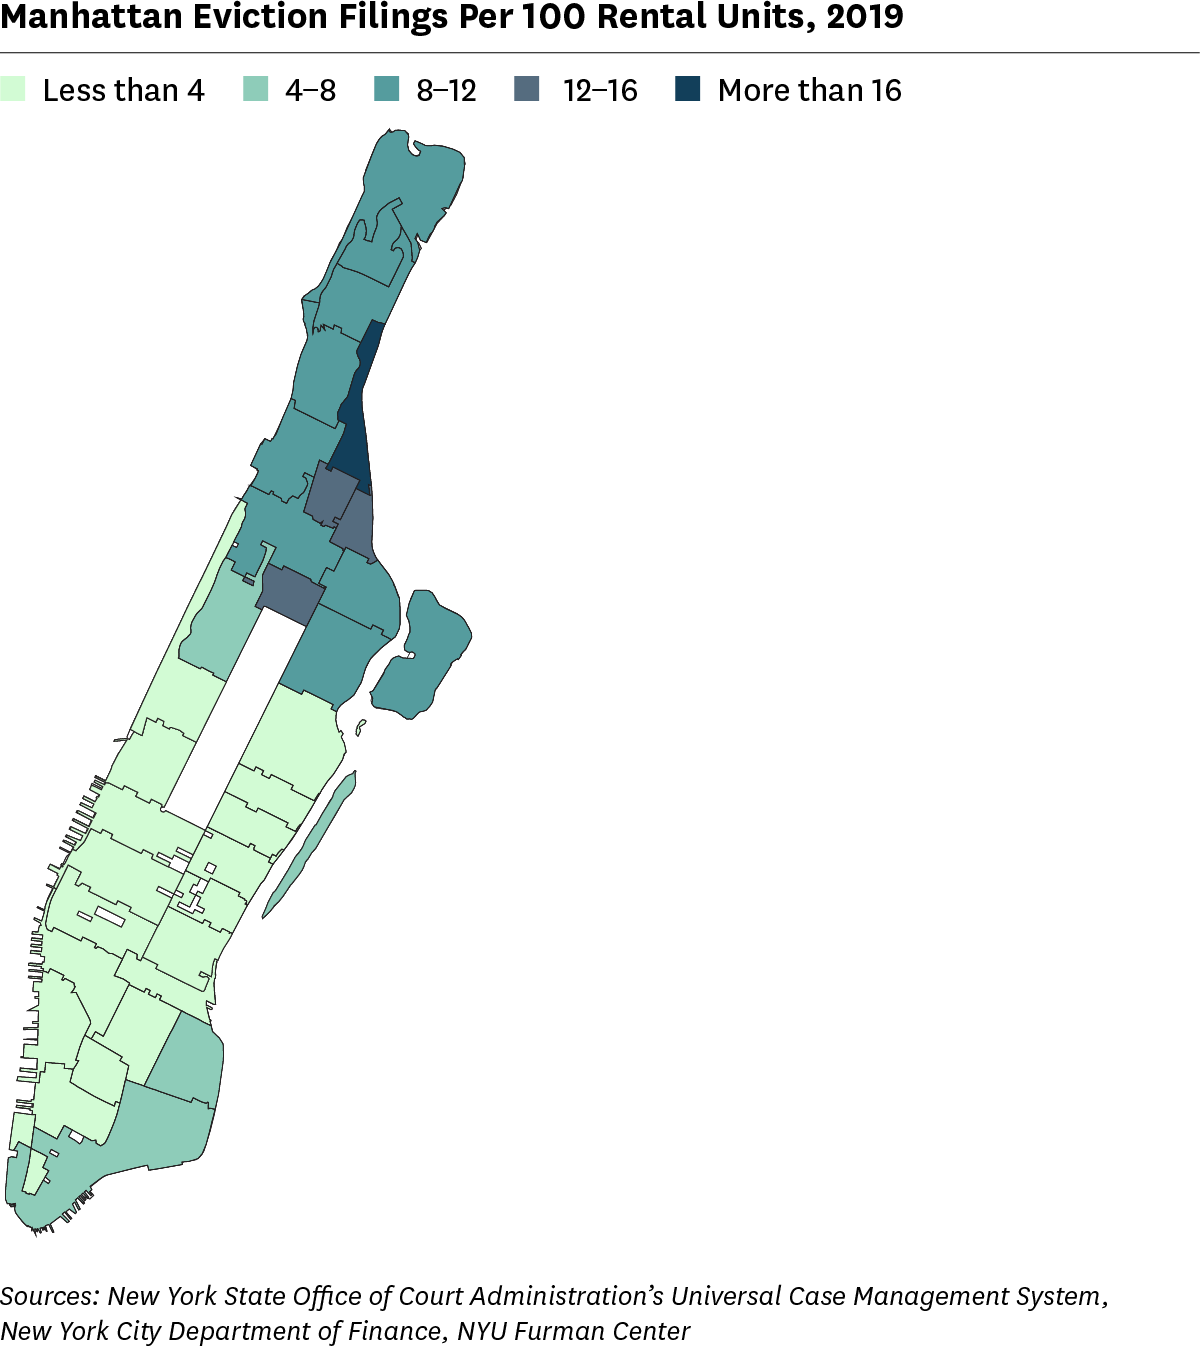 Map showing 2019 eviction filing rates for ZIP Code areas in Manhattan